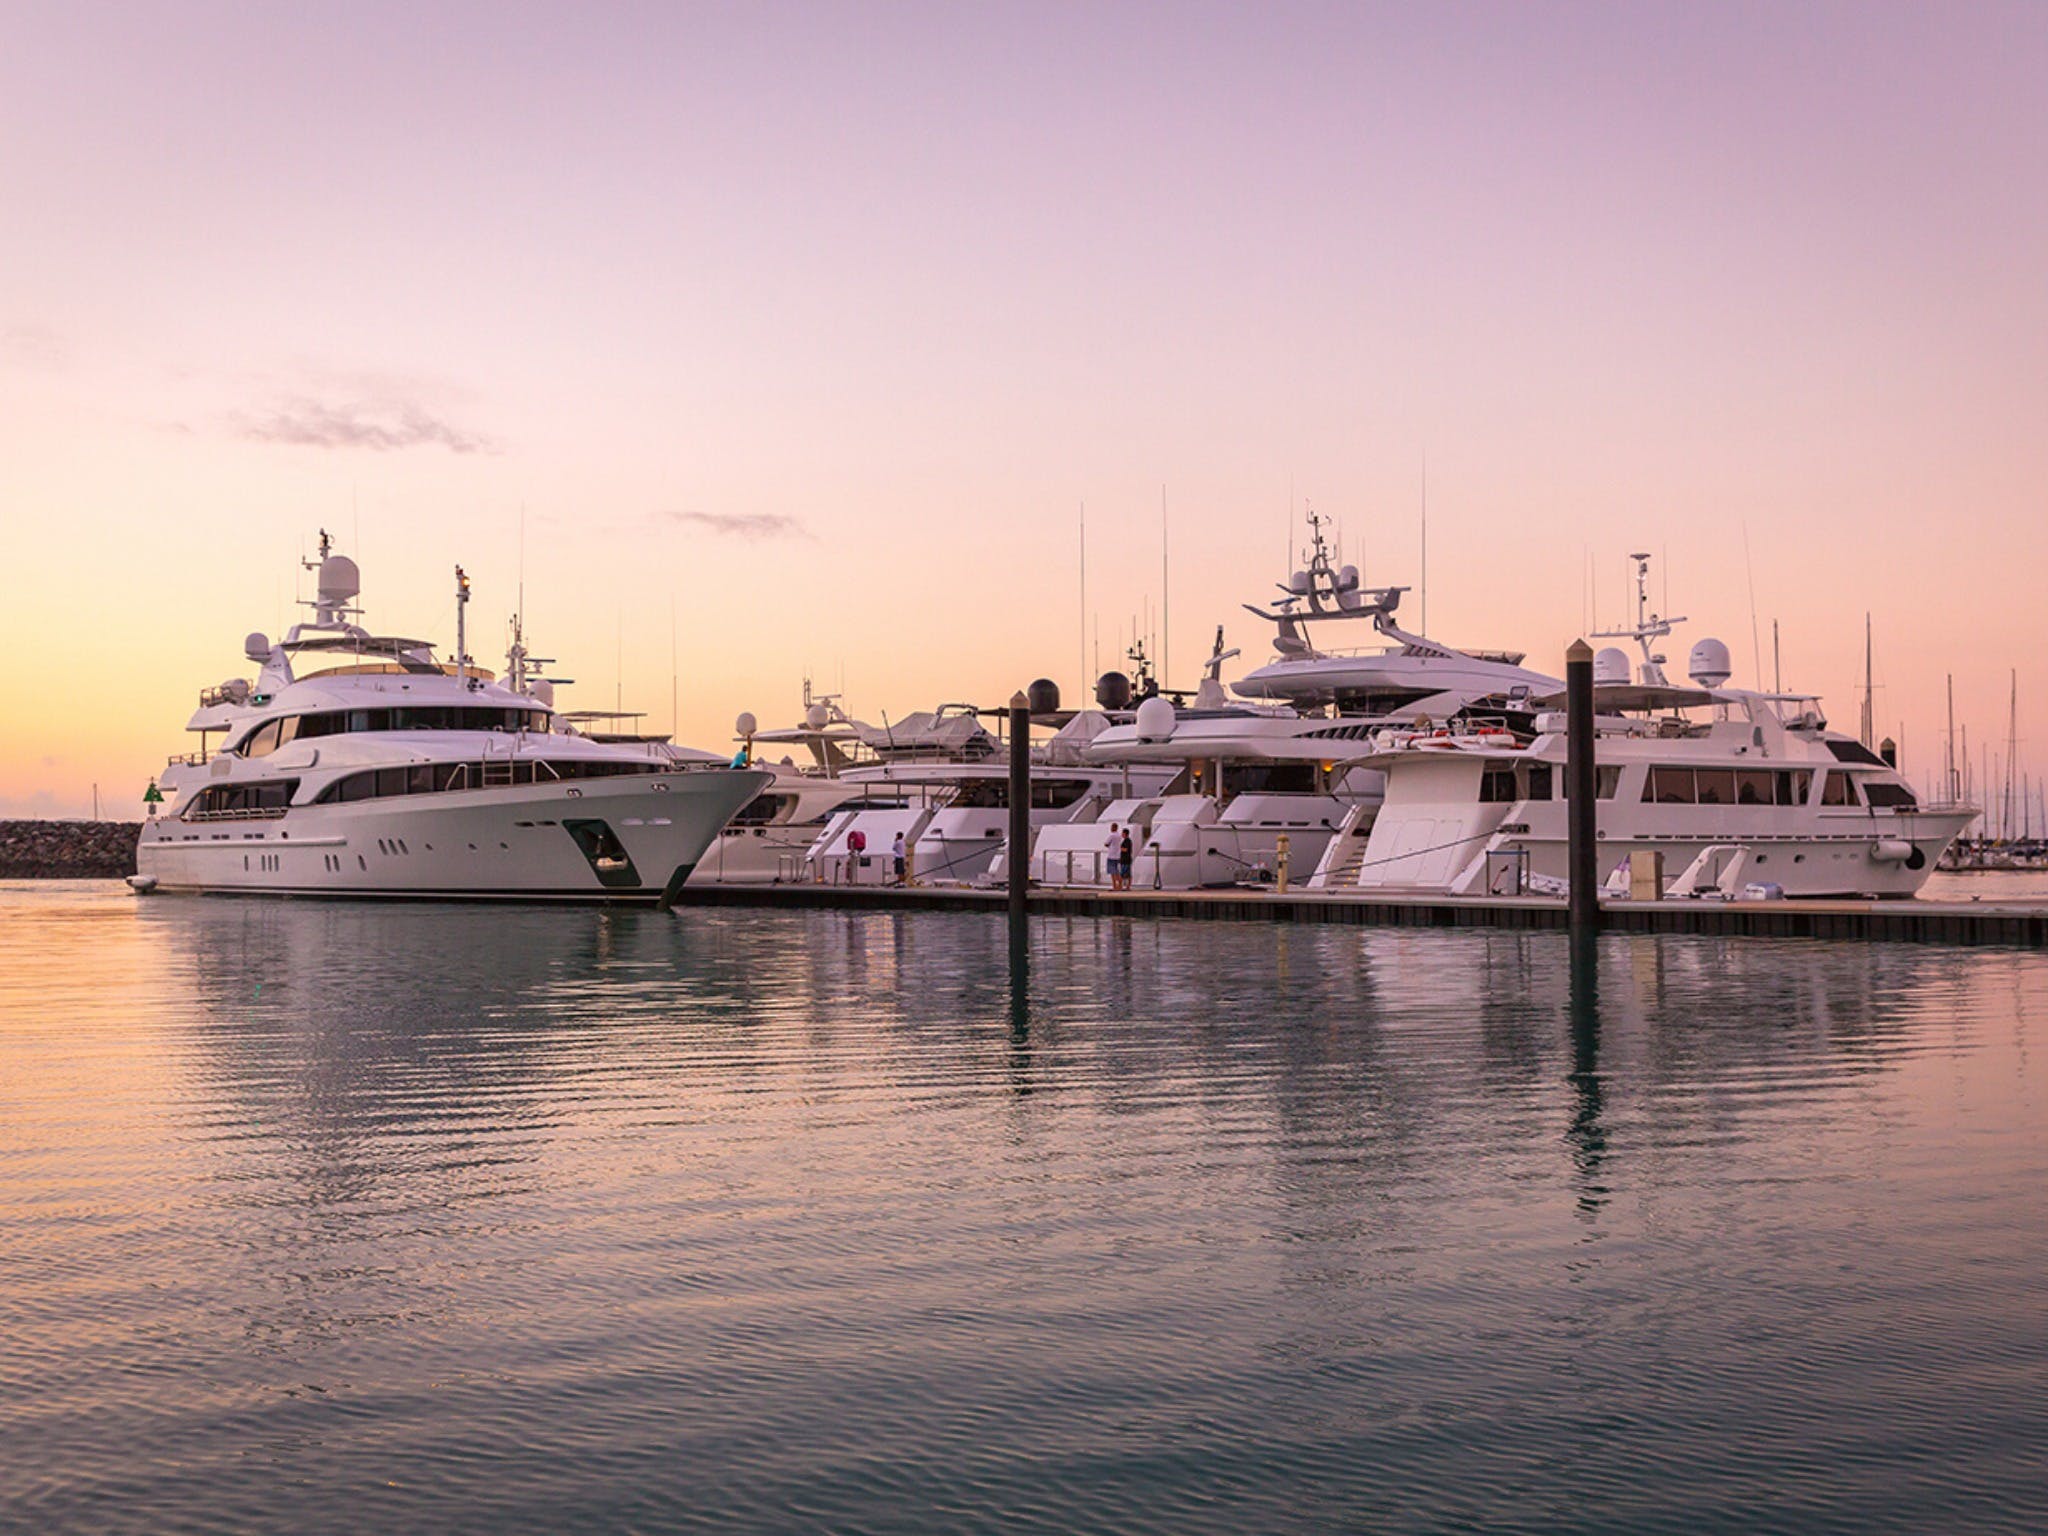 Australian Superyacht Rendezvous - Great Barrier Reef edition - Accommodation Airlie Beach